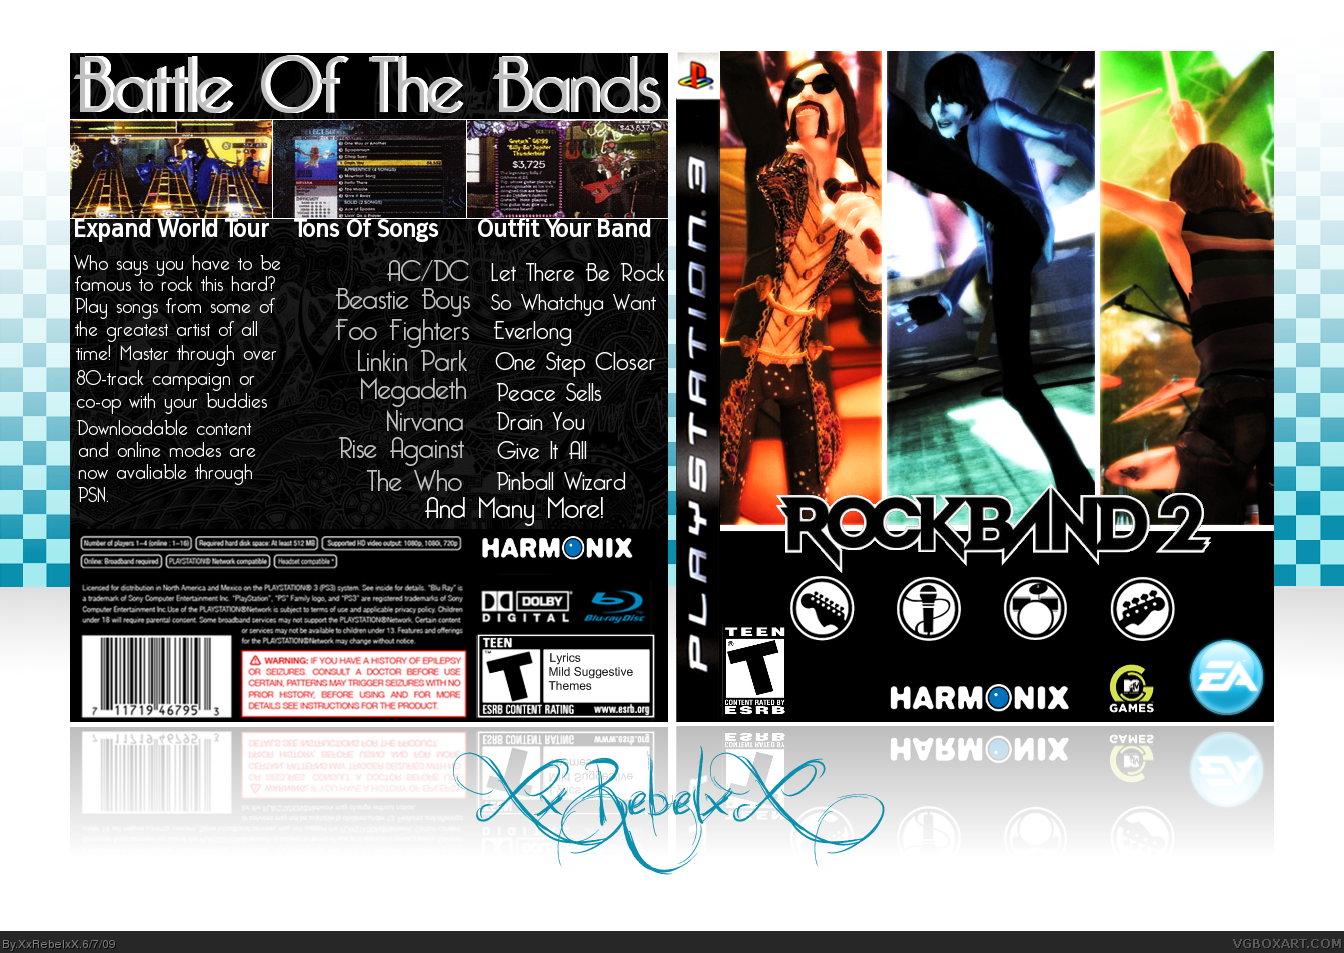 Rock Band 2 box cover